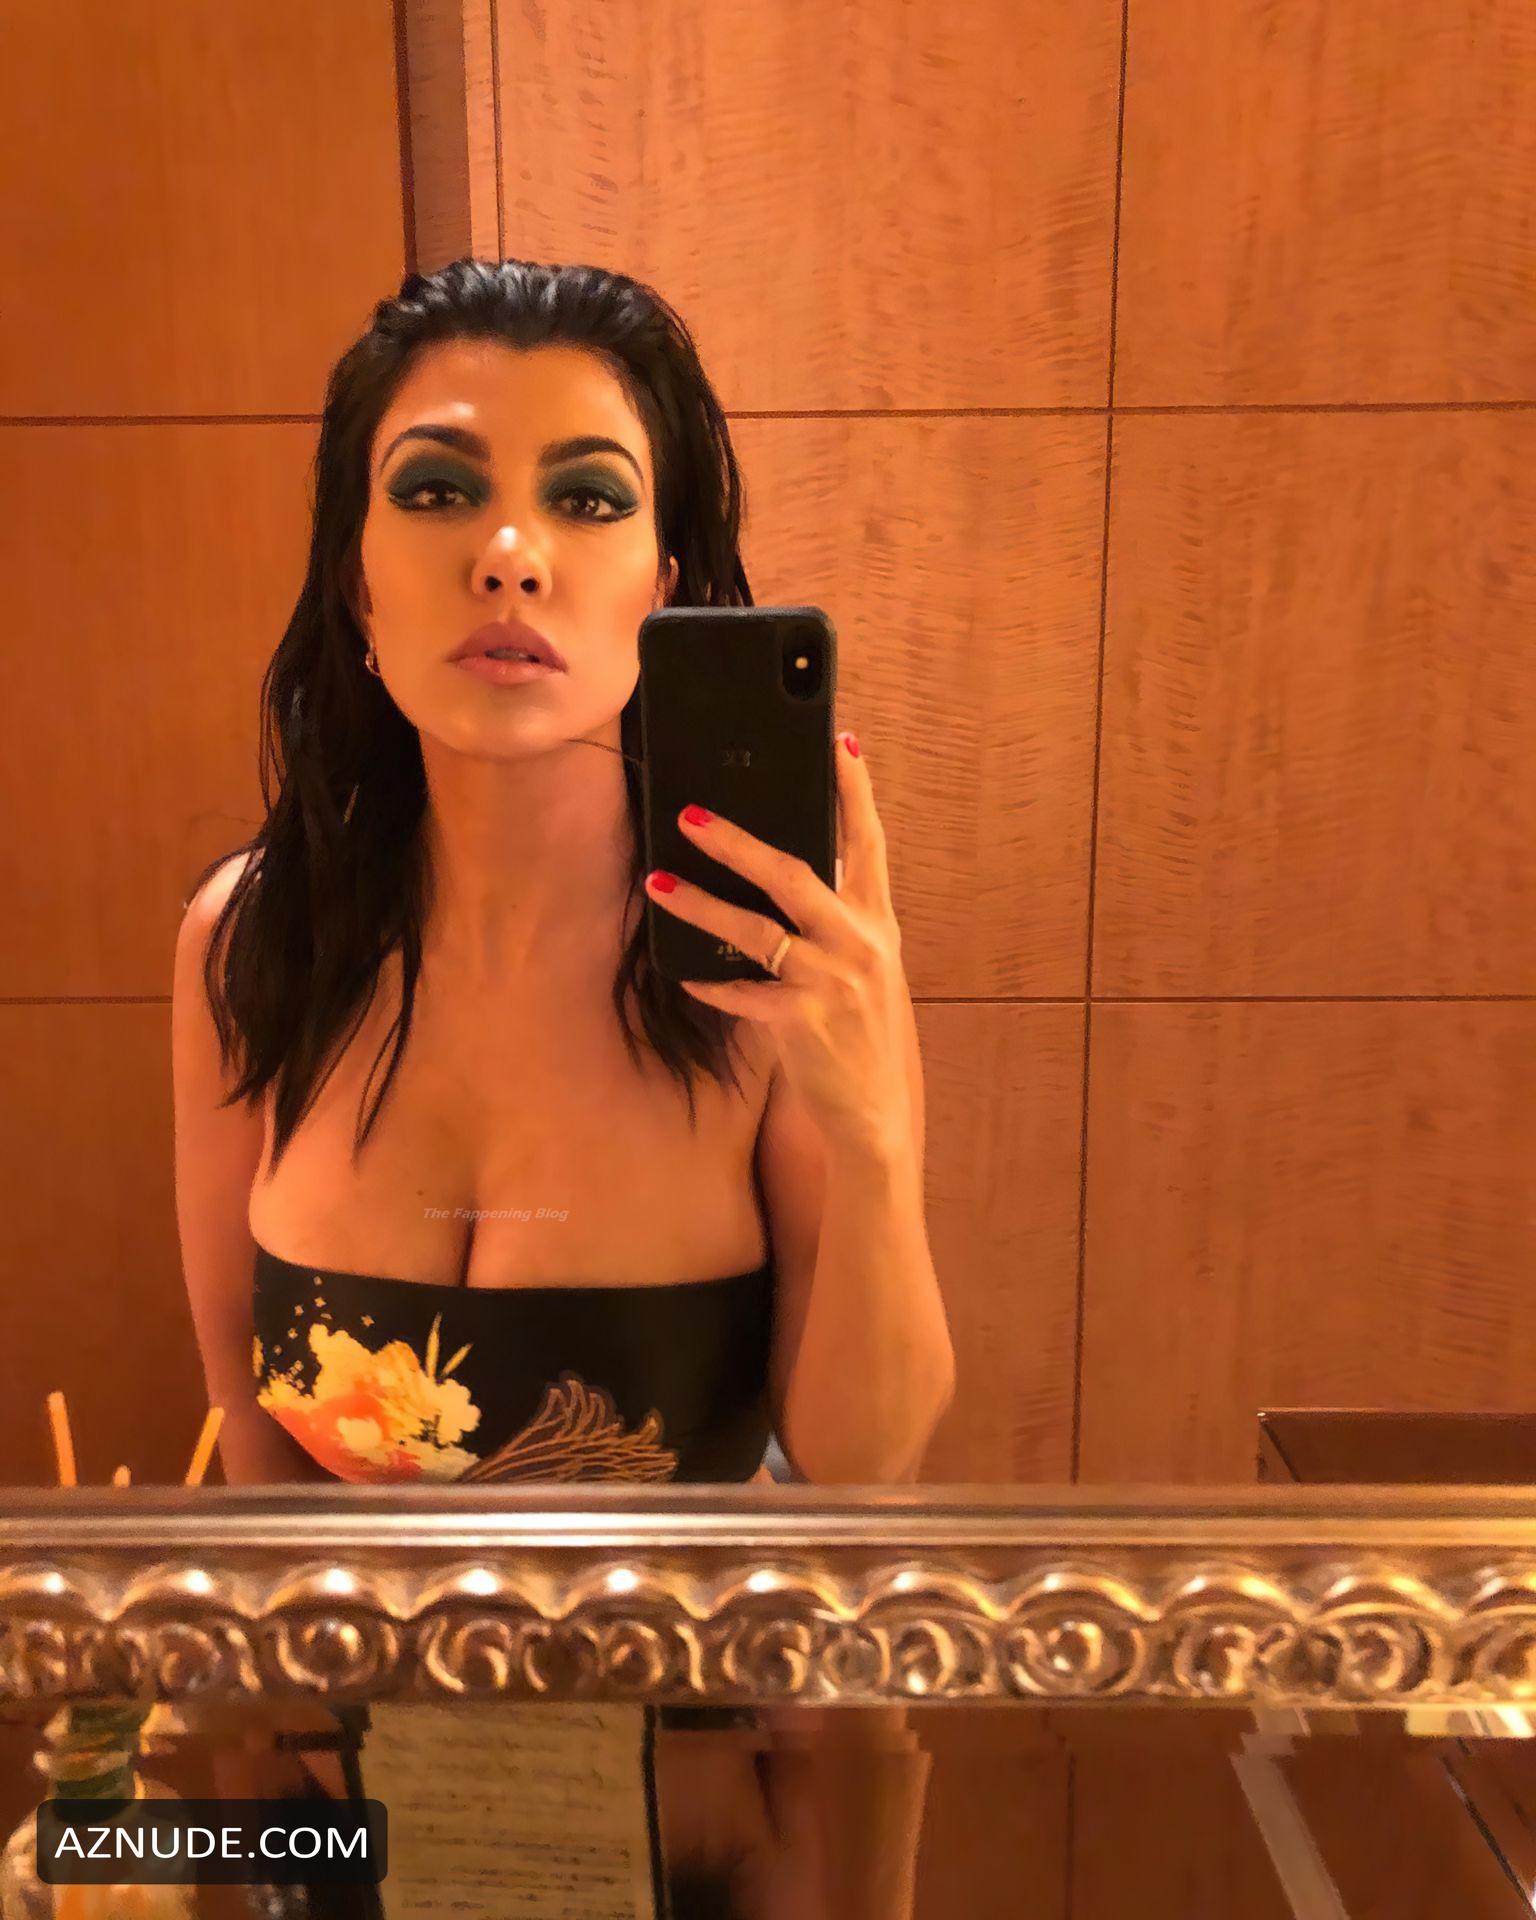 Kourtney Kardashian Sexy Shows Off Her Deep Cleavage And Round Butt In Various Photoshoots Aznude